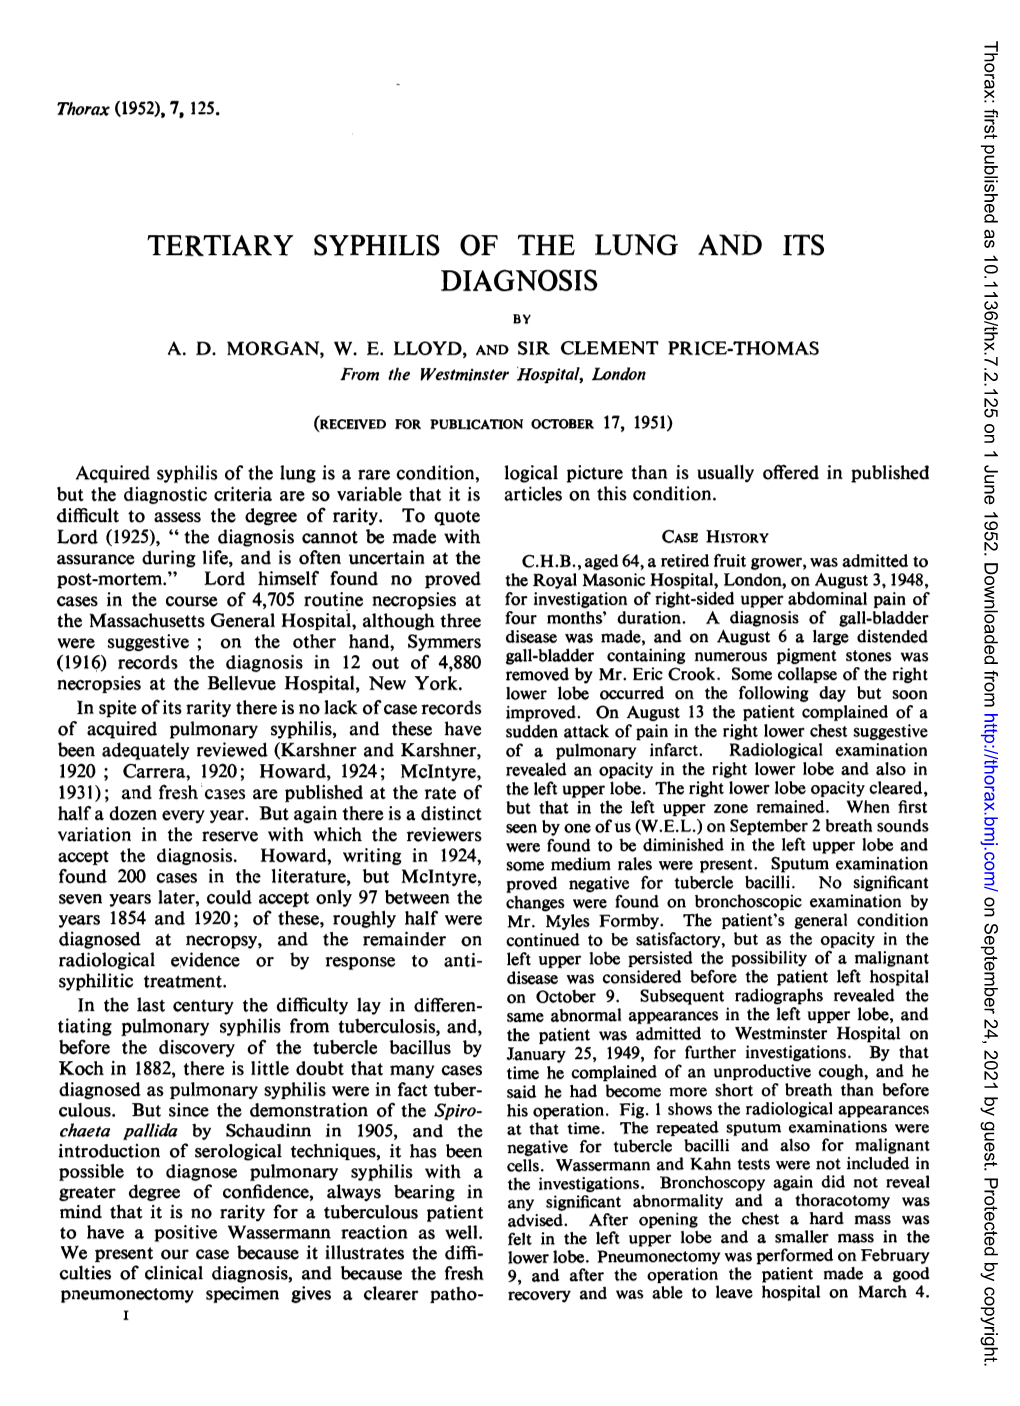 Tertiary Syphilis of the Lung and Its Diagnosis by A